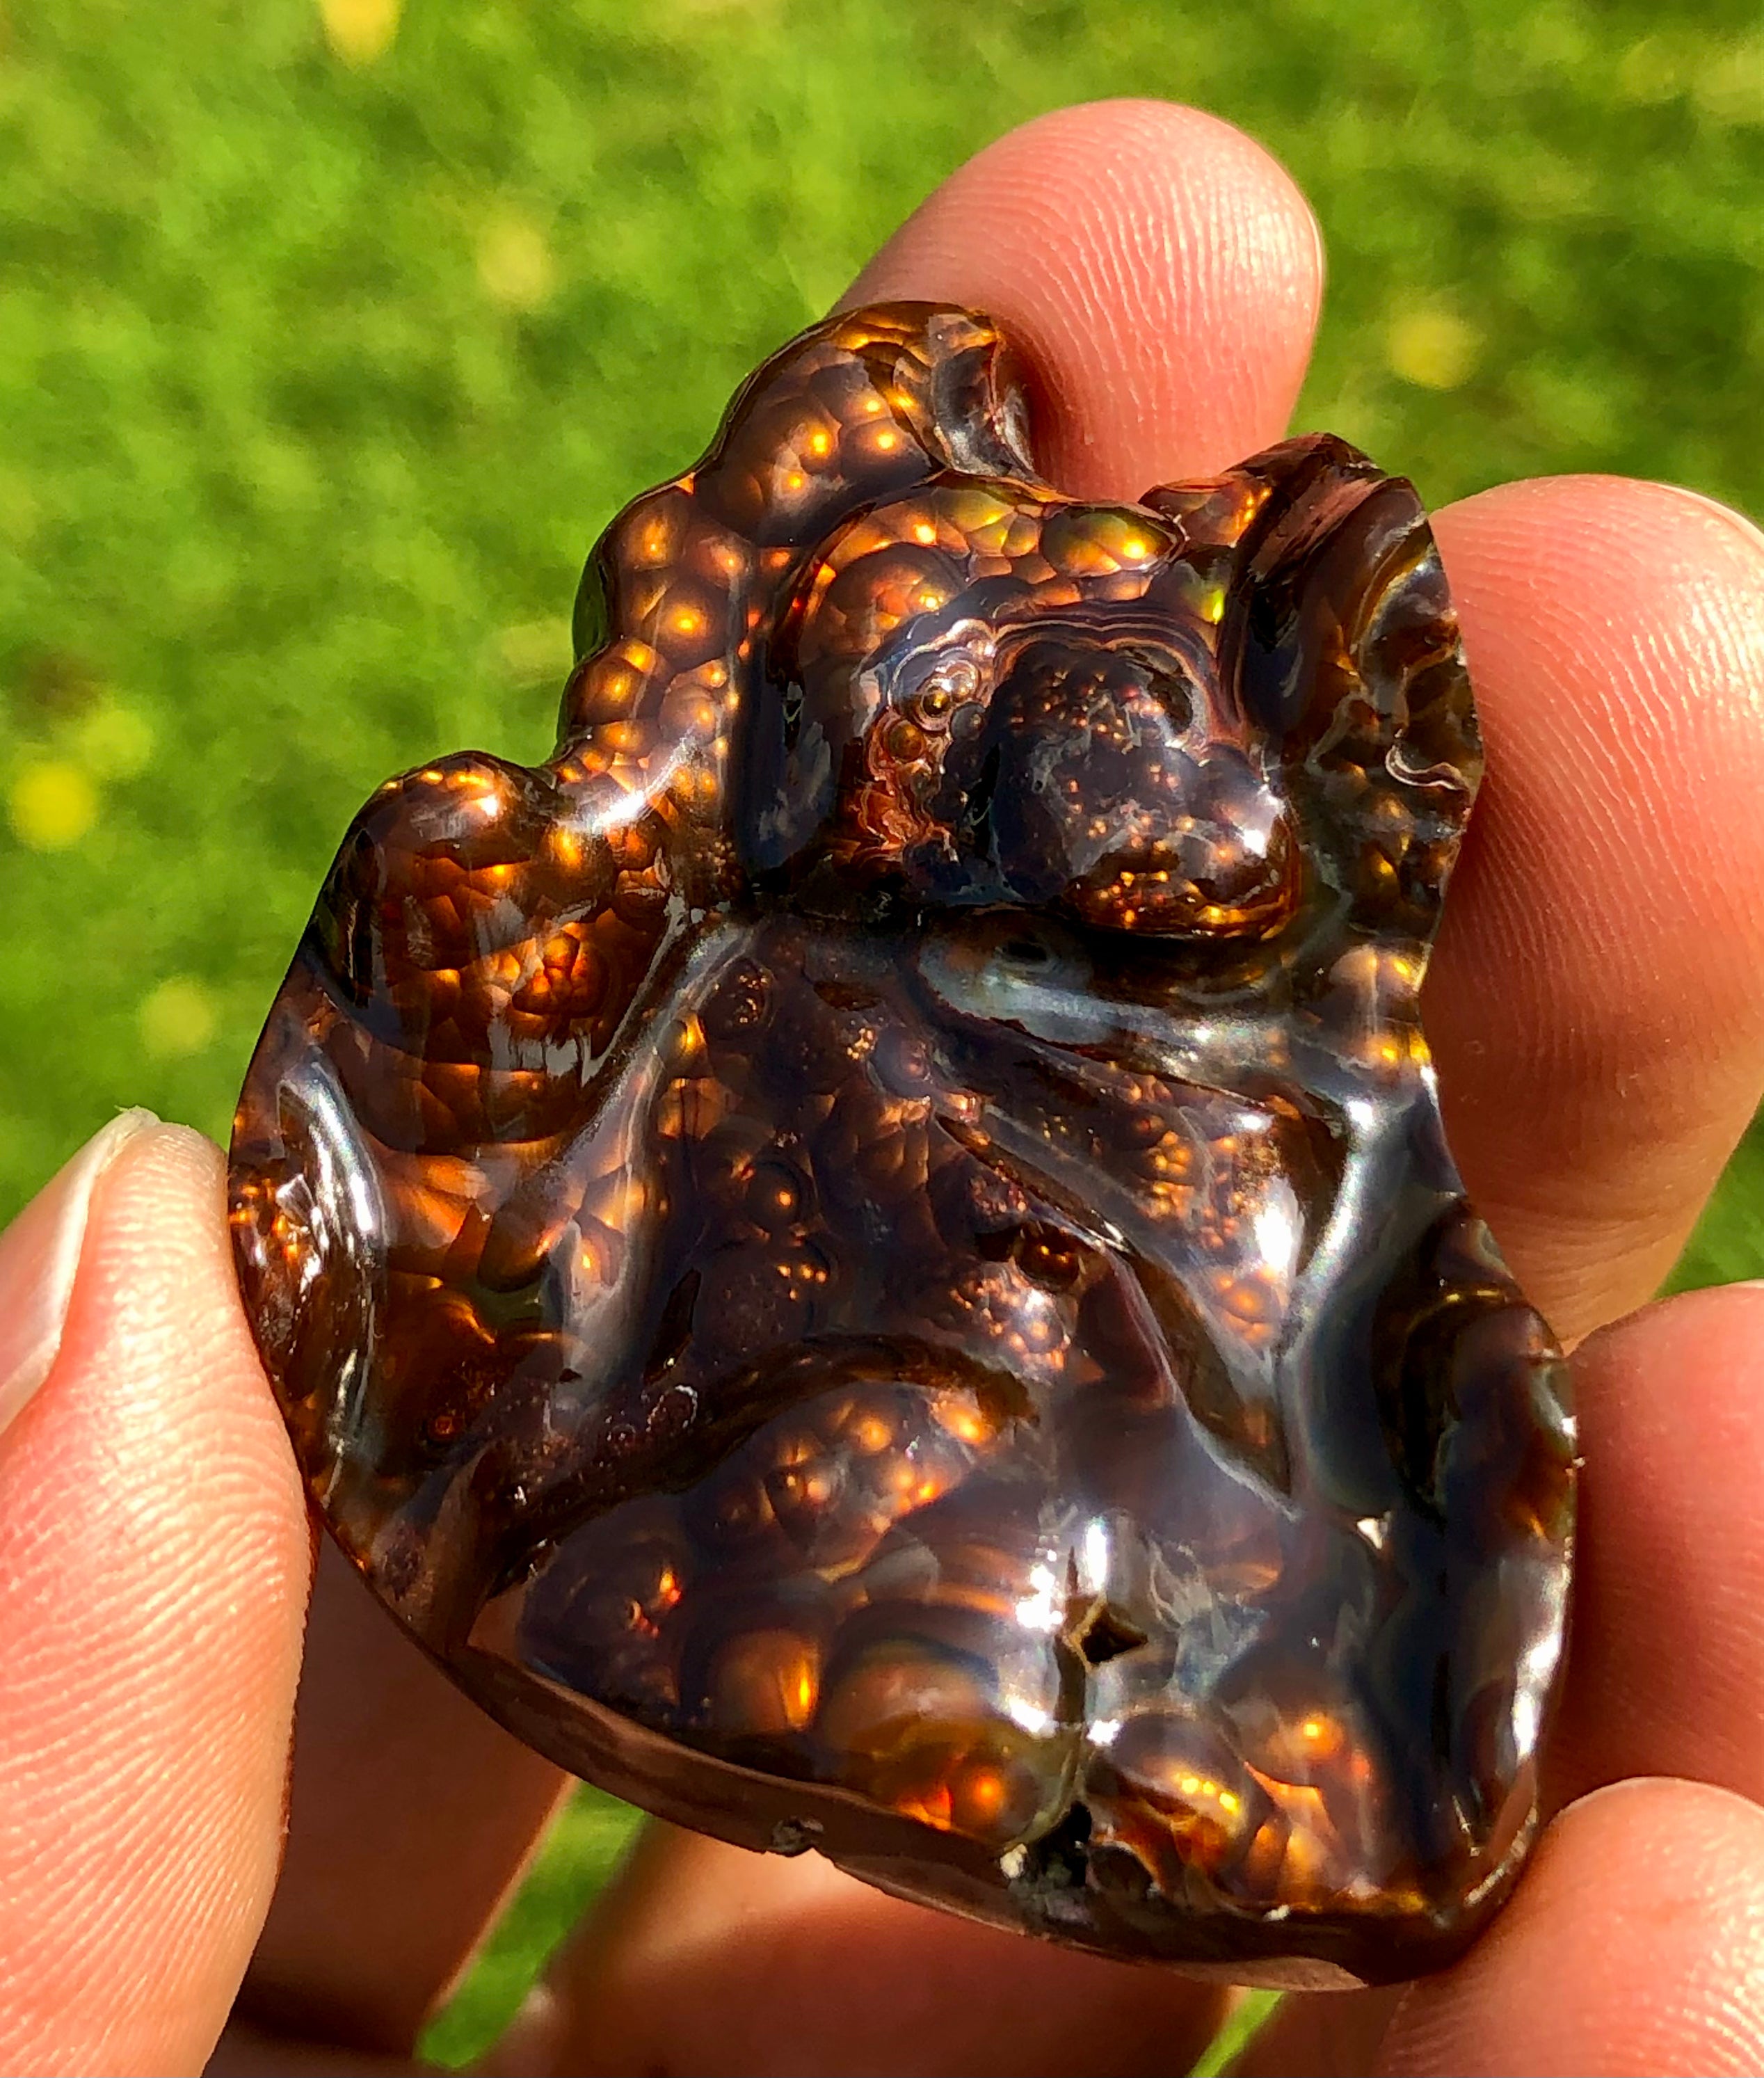 133ct Big Size Rare Fire Agate Carving, Lava Bubbling out of it - Collector Gemstone